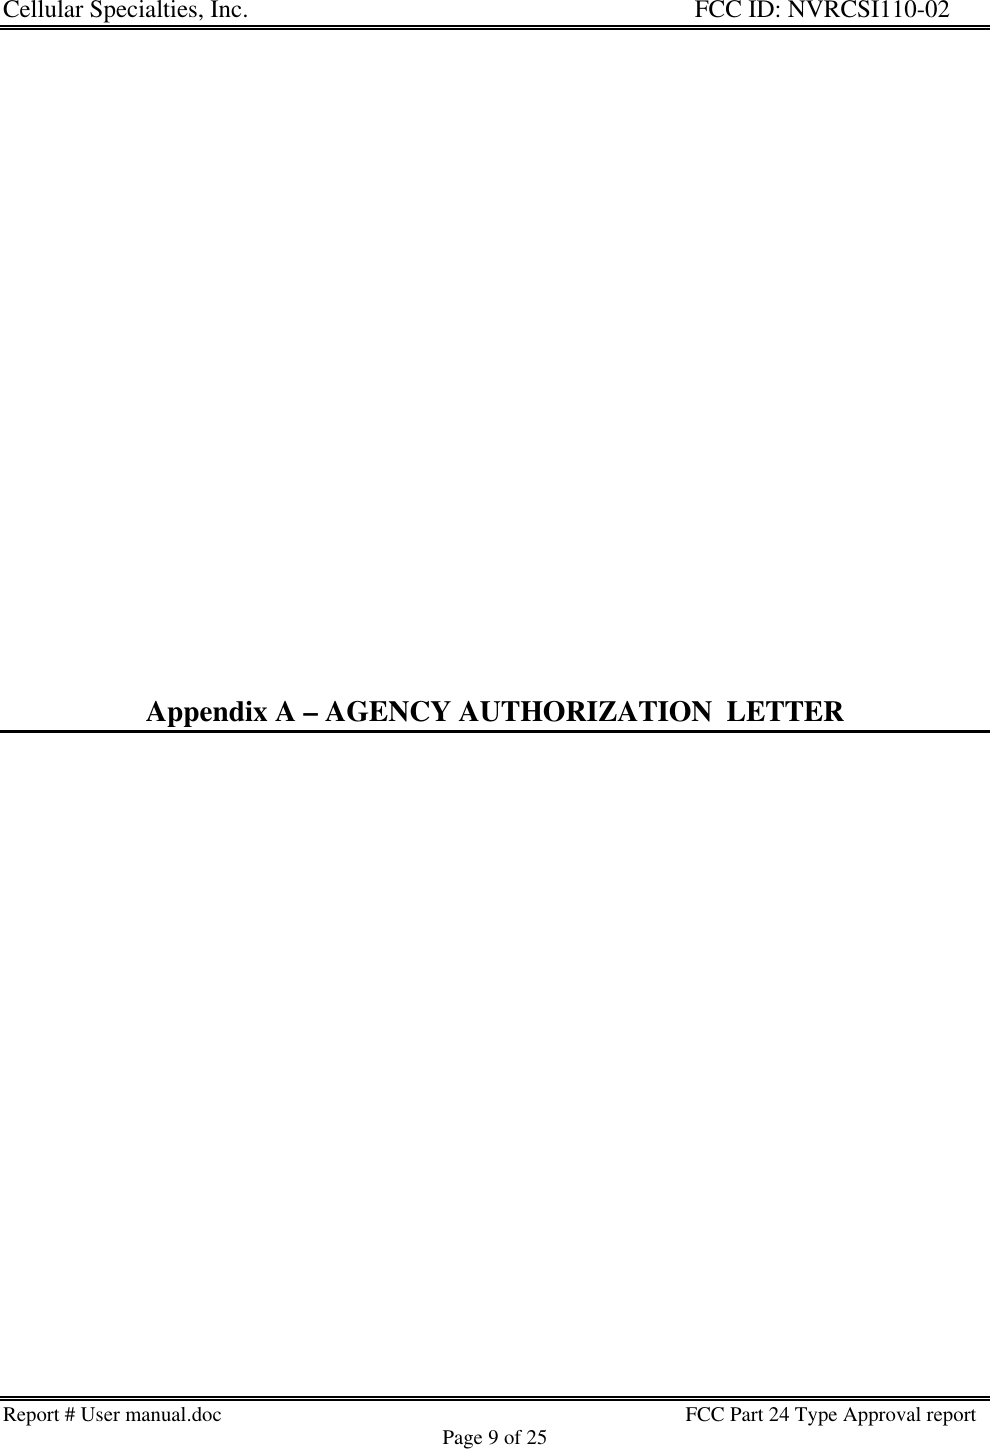 Cellular Specialties, Inc. FCC ID: NVRCSI110-02Report # User manual.doc                                                                                         FCC Part 24 Type Approval reportPage 9 of 25Appendix A – AGENCY AUTHORIZATION  LETTER